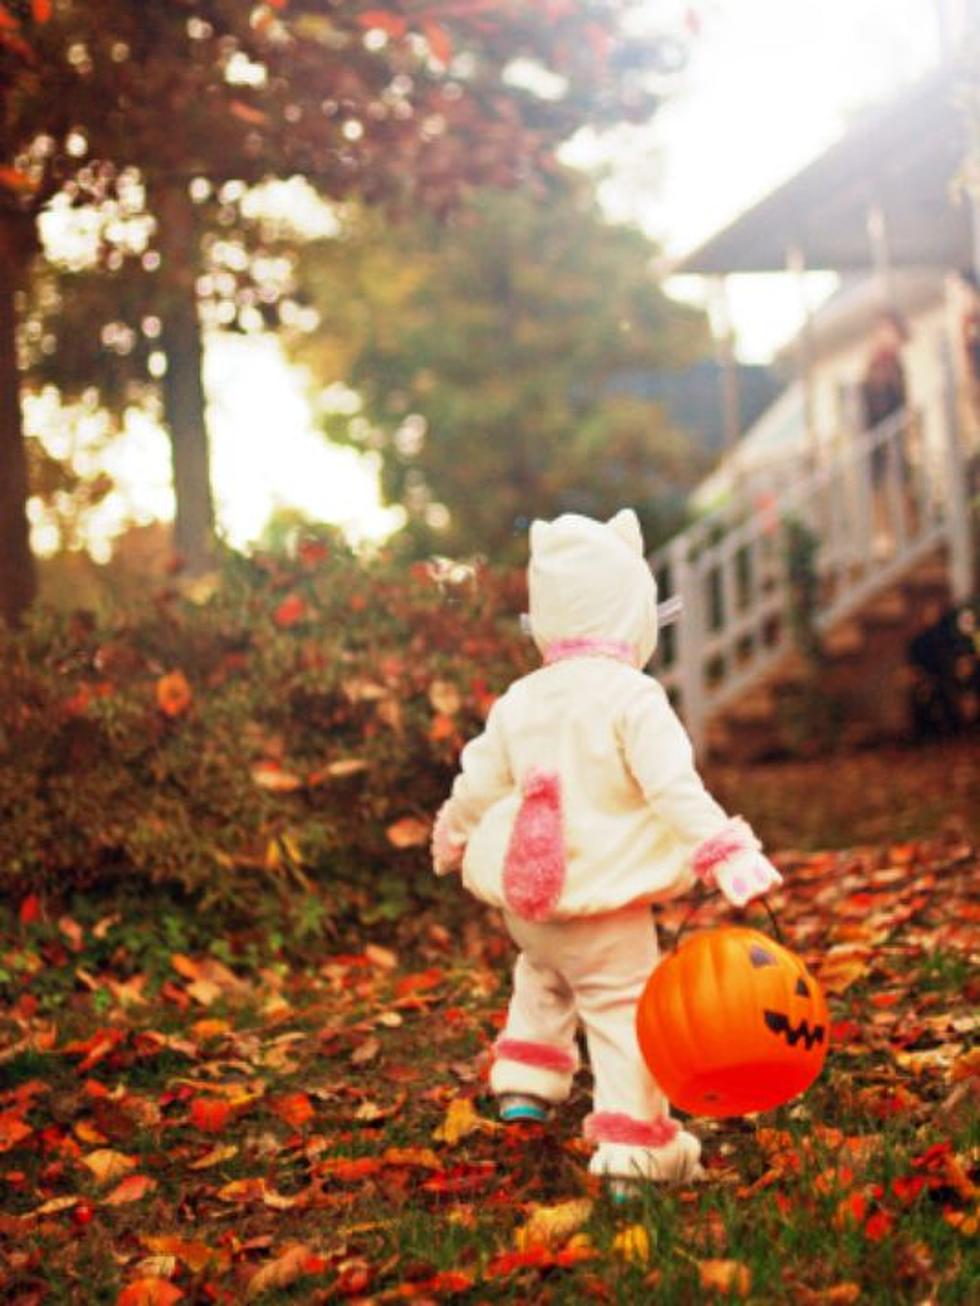 For Parents Who Almost Love Their Kids – Track Them With GPS on Halloween [App]